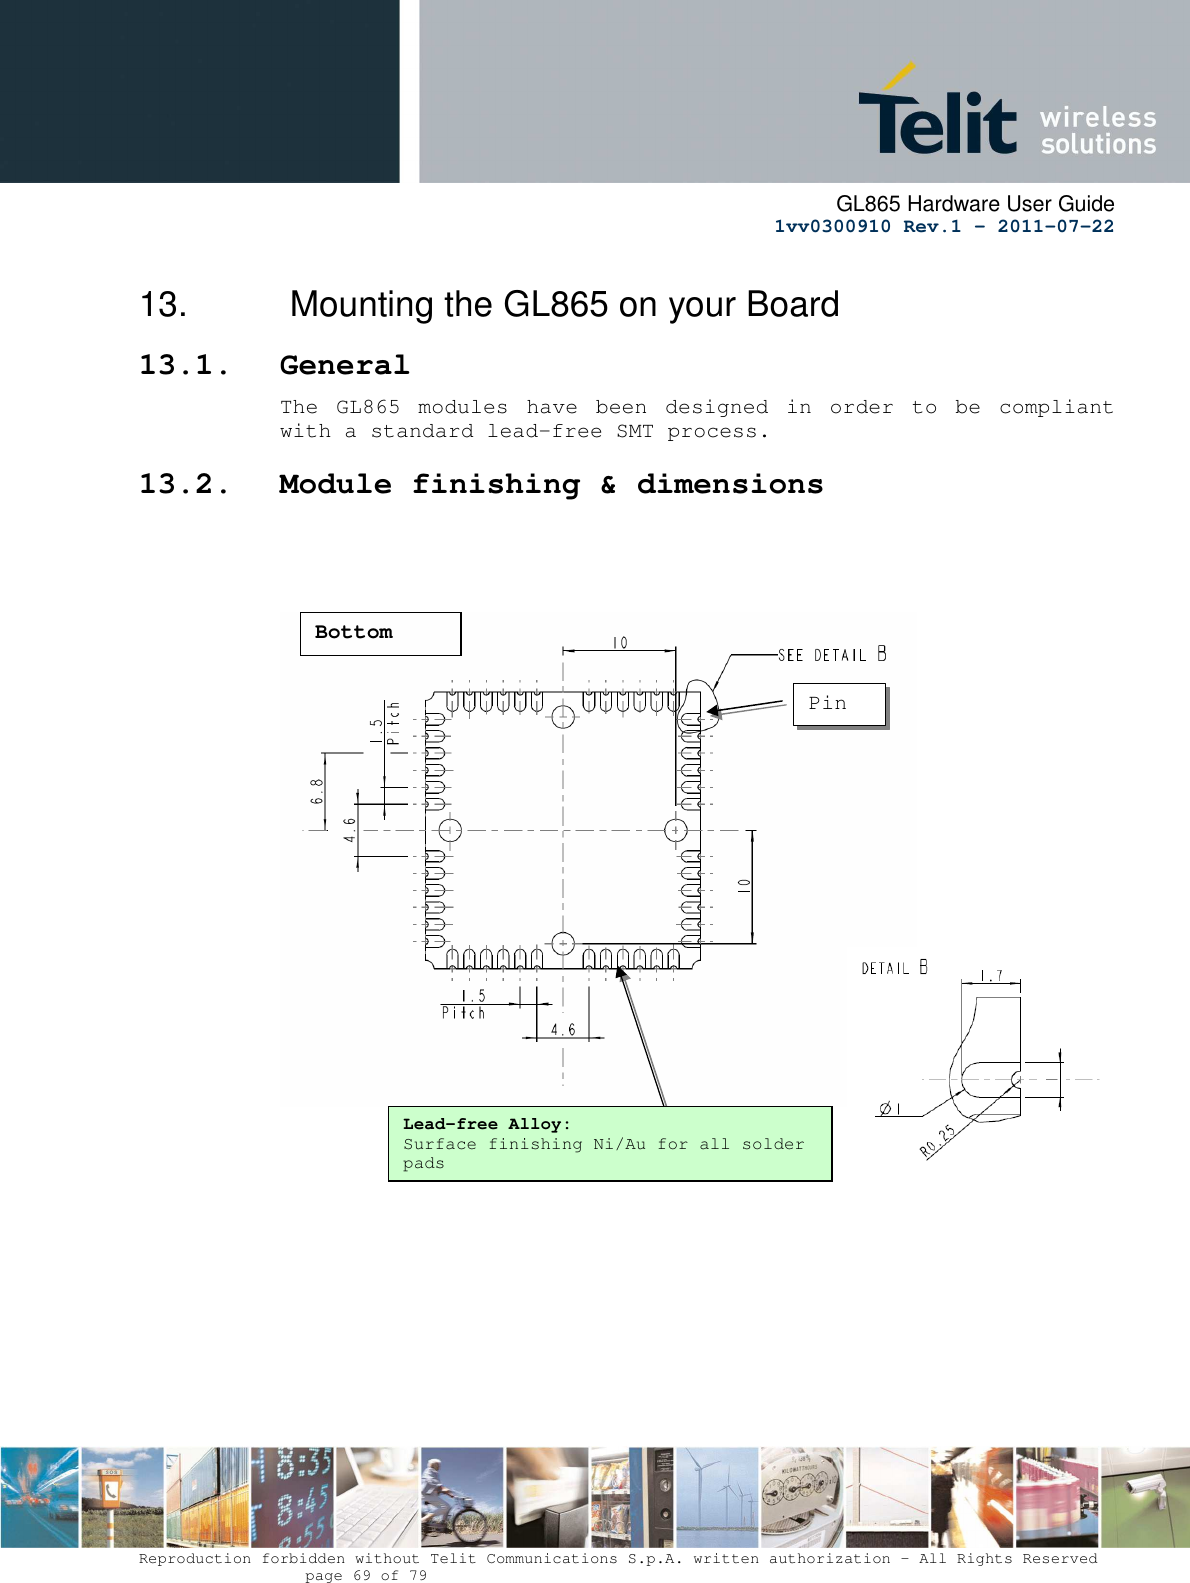      GL865 Hardware User Guide     1vv0300910 Rev.1 – 2011-07-22       Reproduction forbidden without Telit Communications S.p.A. written authorization - All Rights Reserved    page 69 of 79  13.   Mounting the GL865 on your Board 13.1. General The GL865  modules have  been  designed  in  order  to  be  compliant with a standard lead-free SMT process. 13.2. Module finishing &amp; dimensions            Lead-free Alloy: Surface finishing Ni/Au for all solder pads Pin 1 Bottom View 